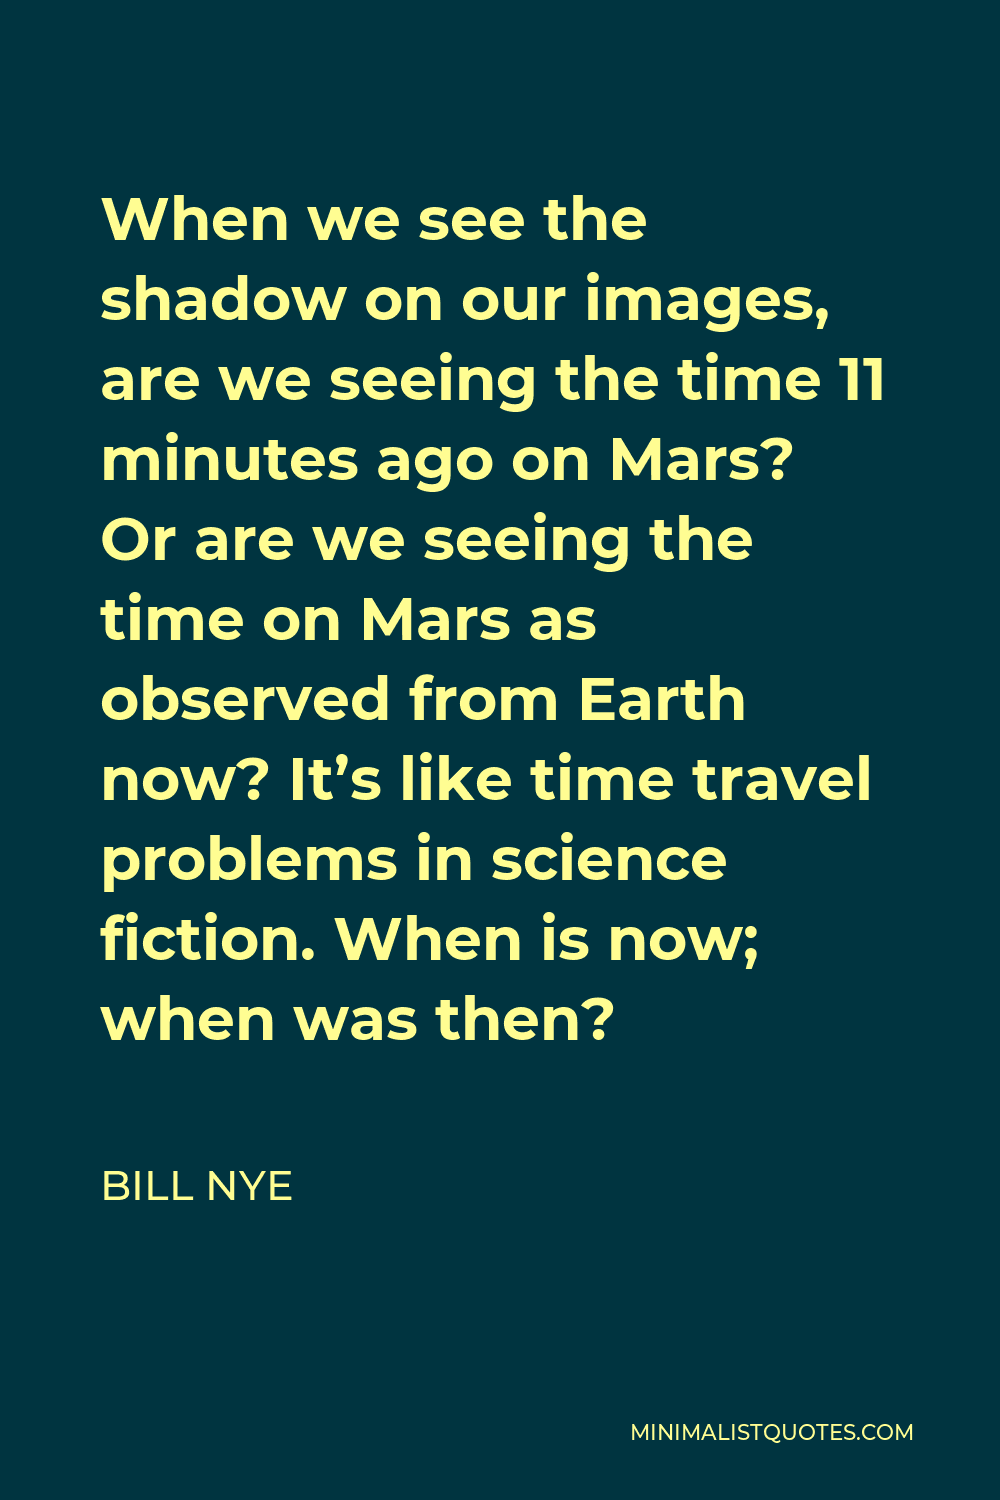 Bill Nye Quote - When we see the shadow on our images, are we seeing the time 11 minutes ago on Mars? Or are we seeing the time on Mars as observed from Earth now? It’s like time travel problems in science fiction. When is now; when was then?